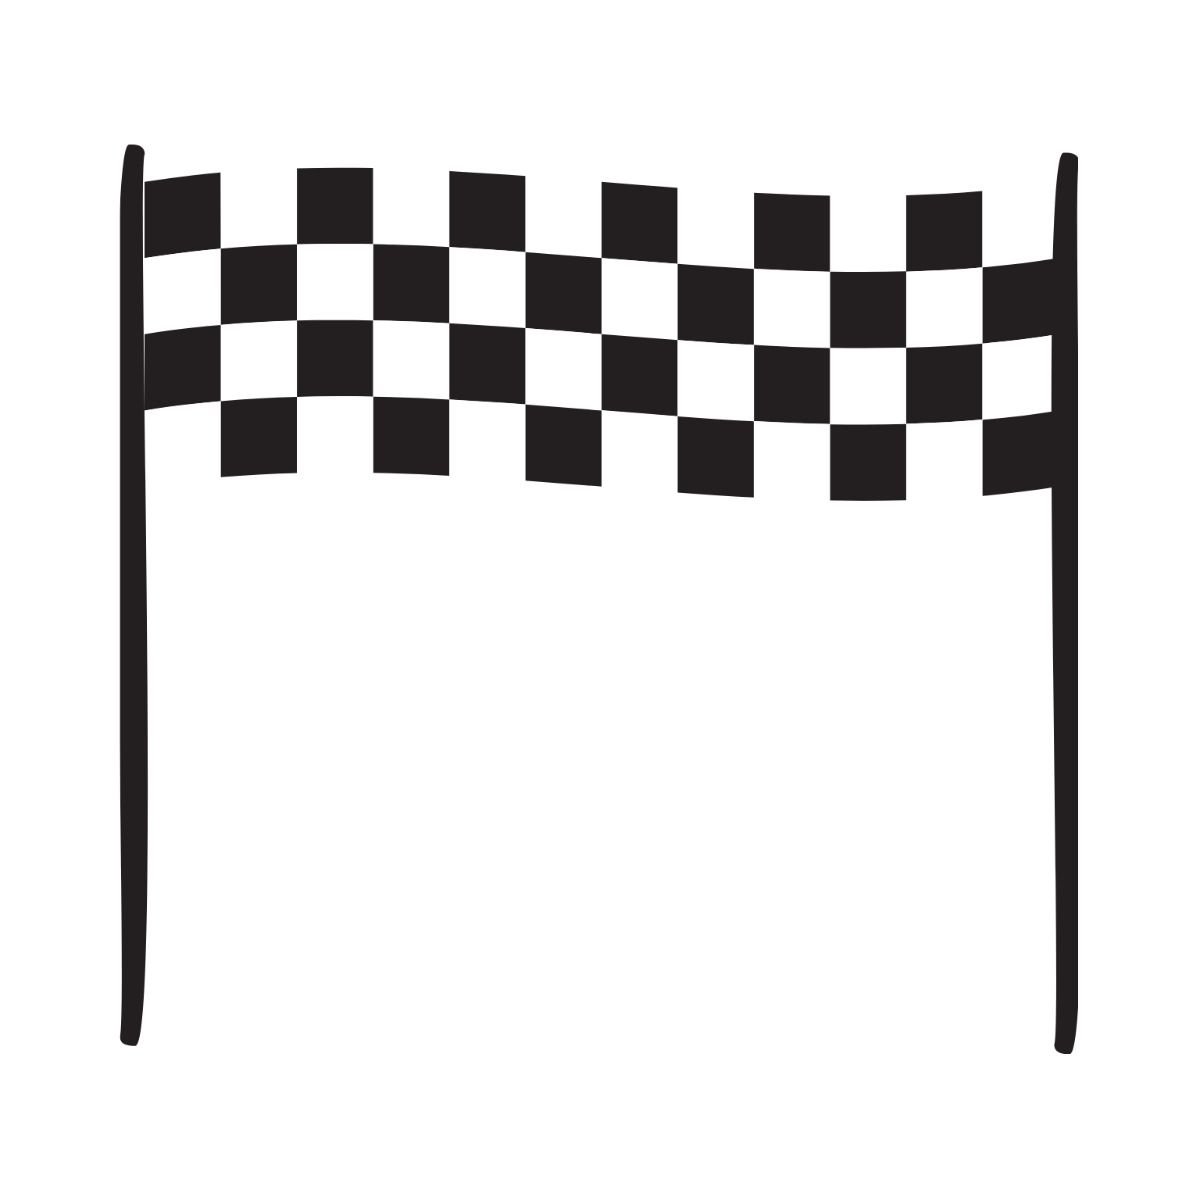 Free Racing Start Flag clipart Template